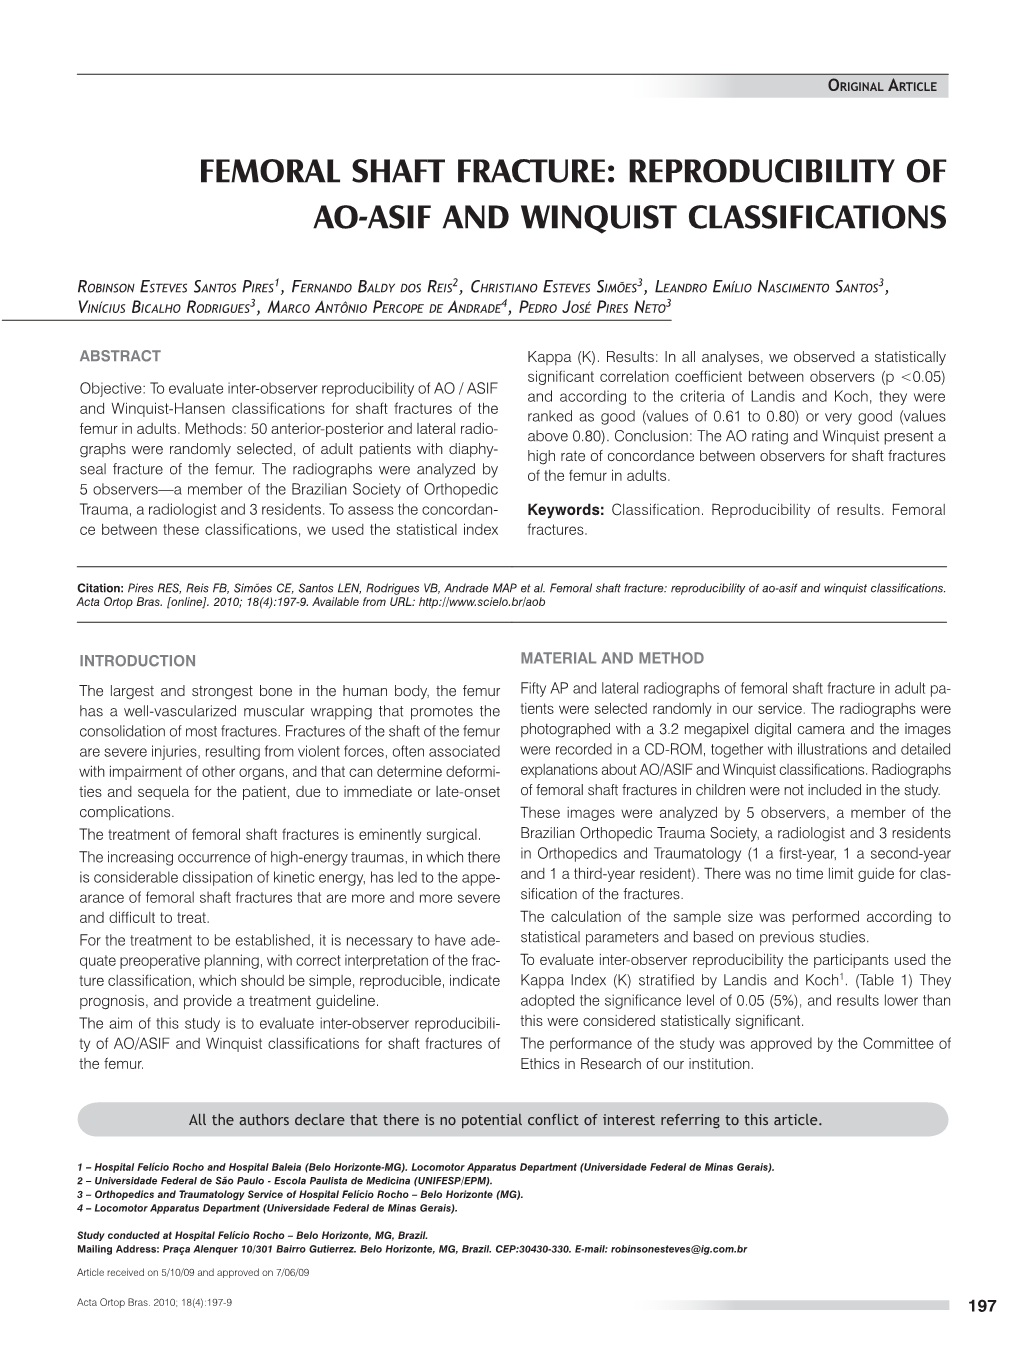 Femoral Shaft Fracture: Reproducibility of Ao-Asif and Winquist Classifications